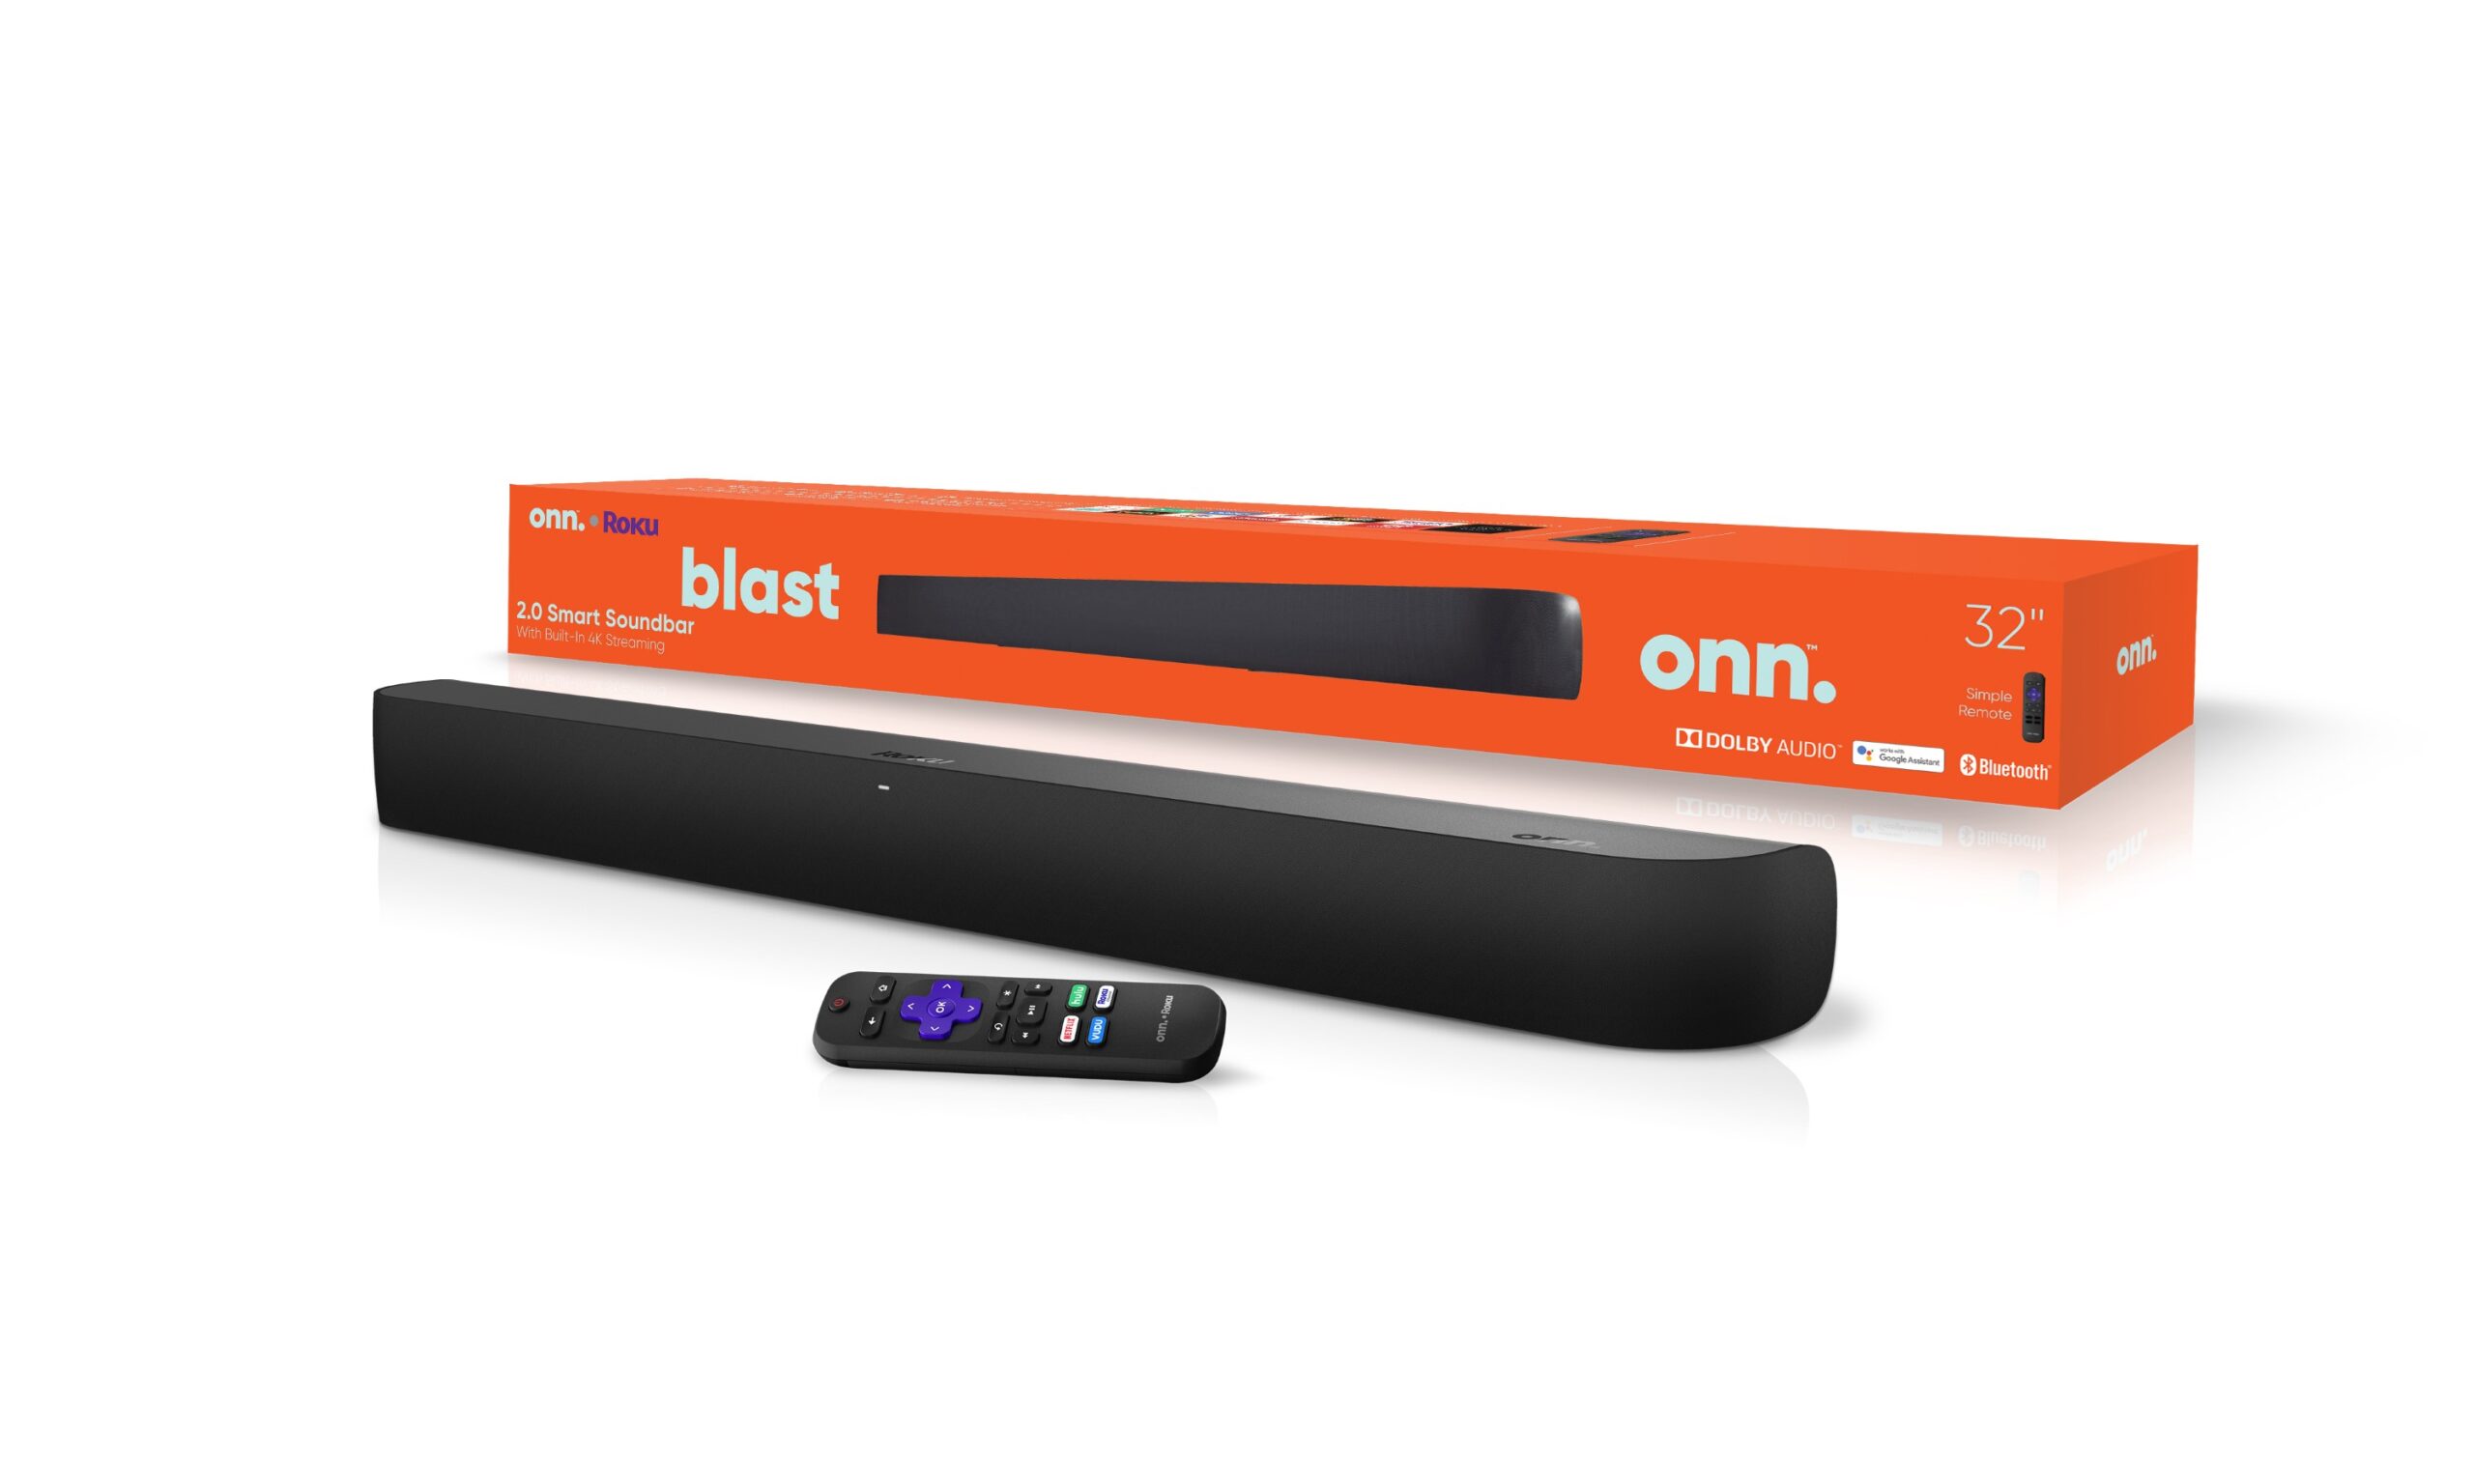 Soundbar App Seamlessly connect the Onn™ Roku Smart Soundbar to other Roku devices within your home, creating a unified streaming ecosystem.